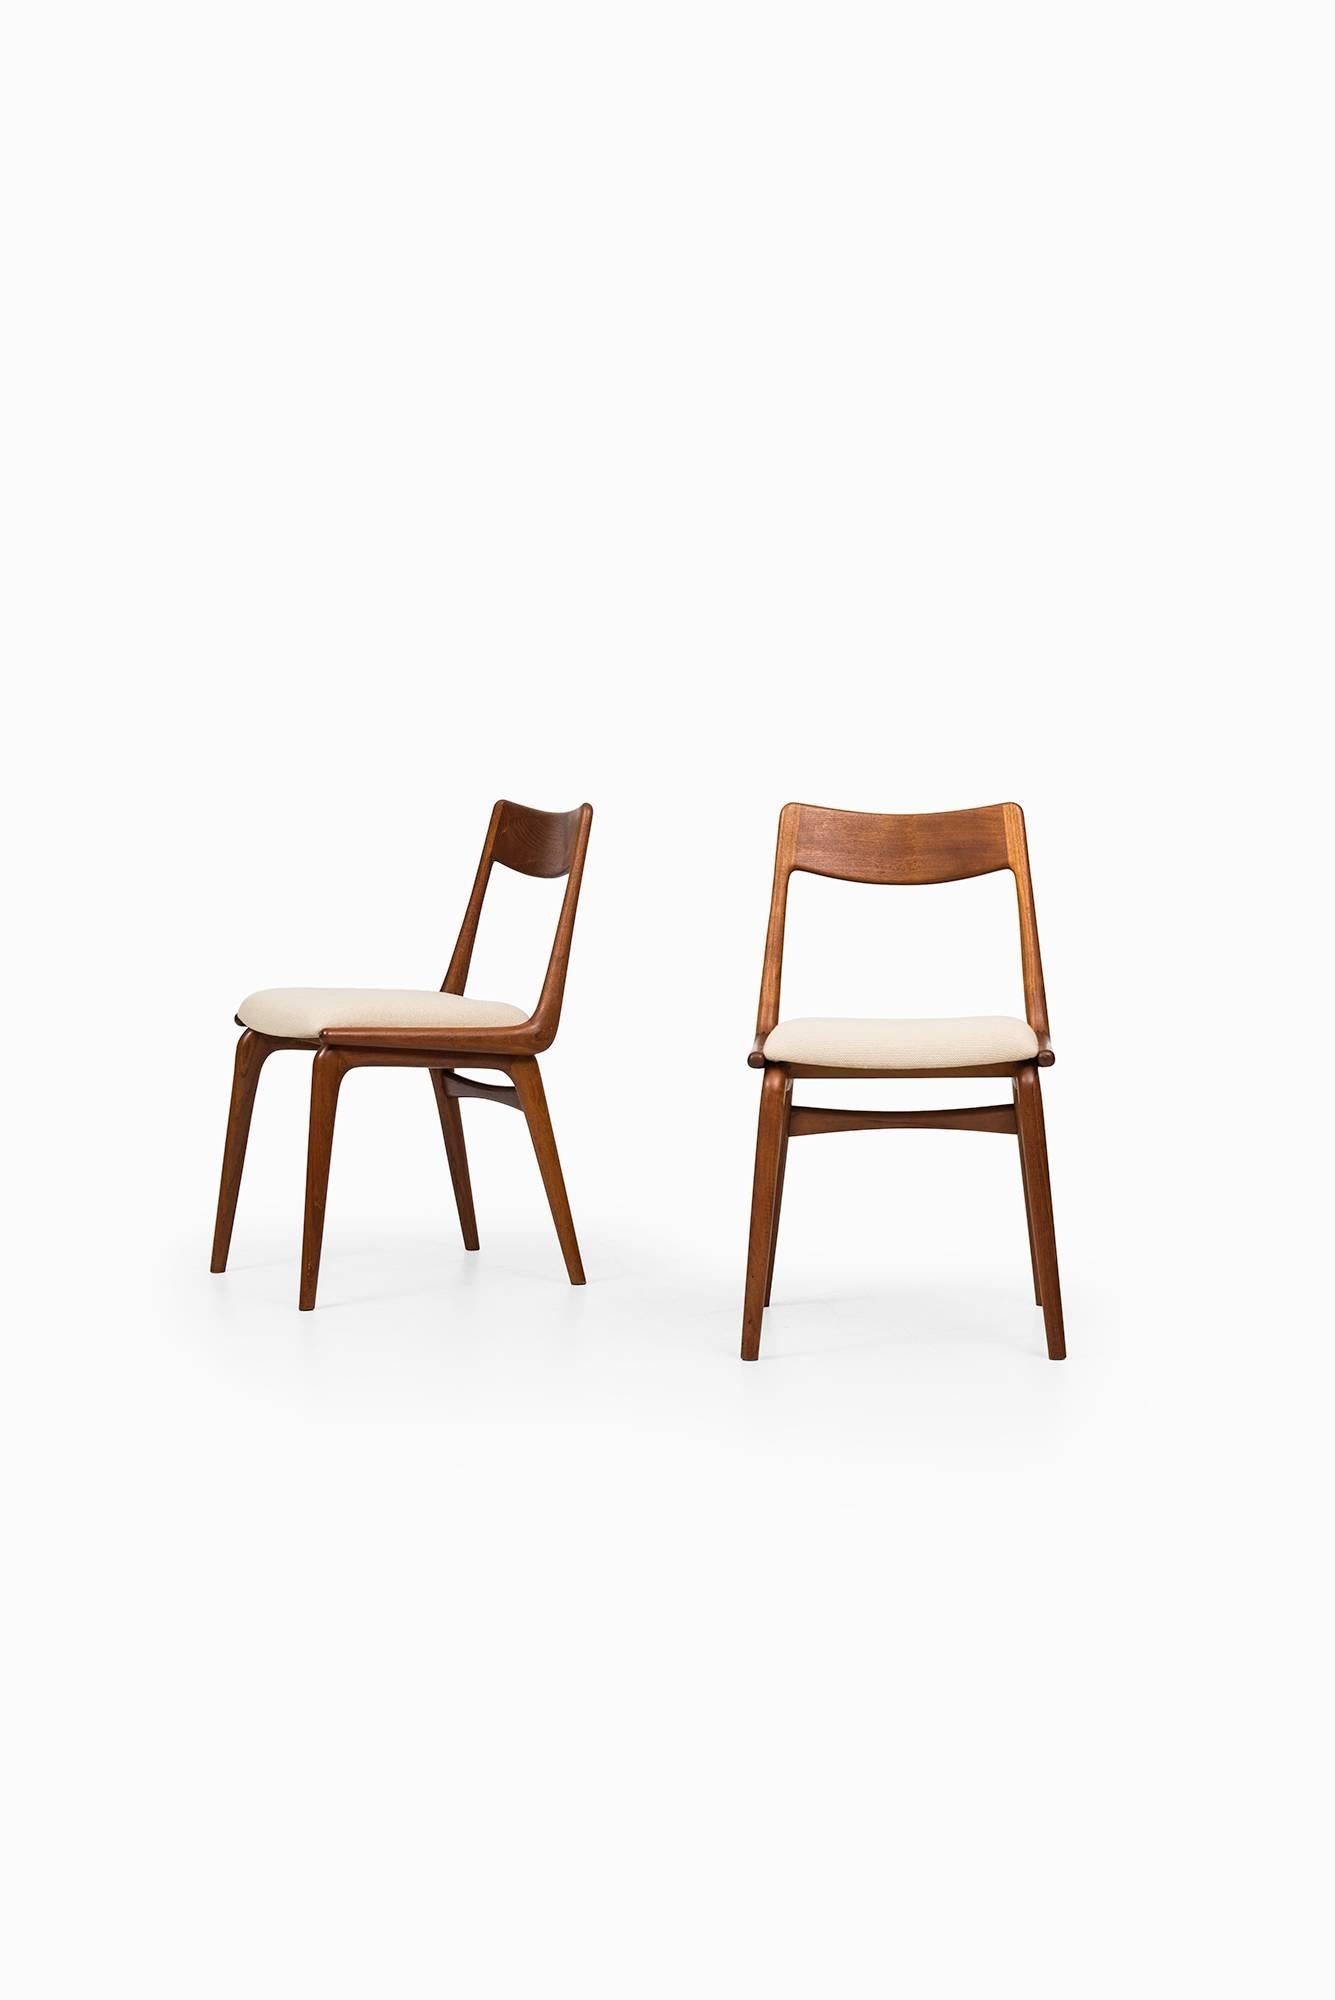 Set of six dining chairs model boomerang designed by Alfred Christensen. Produced by Slagelse Møbelfabrik in Denmark.